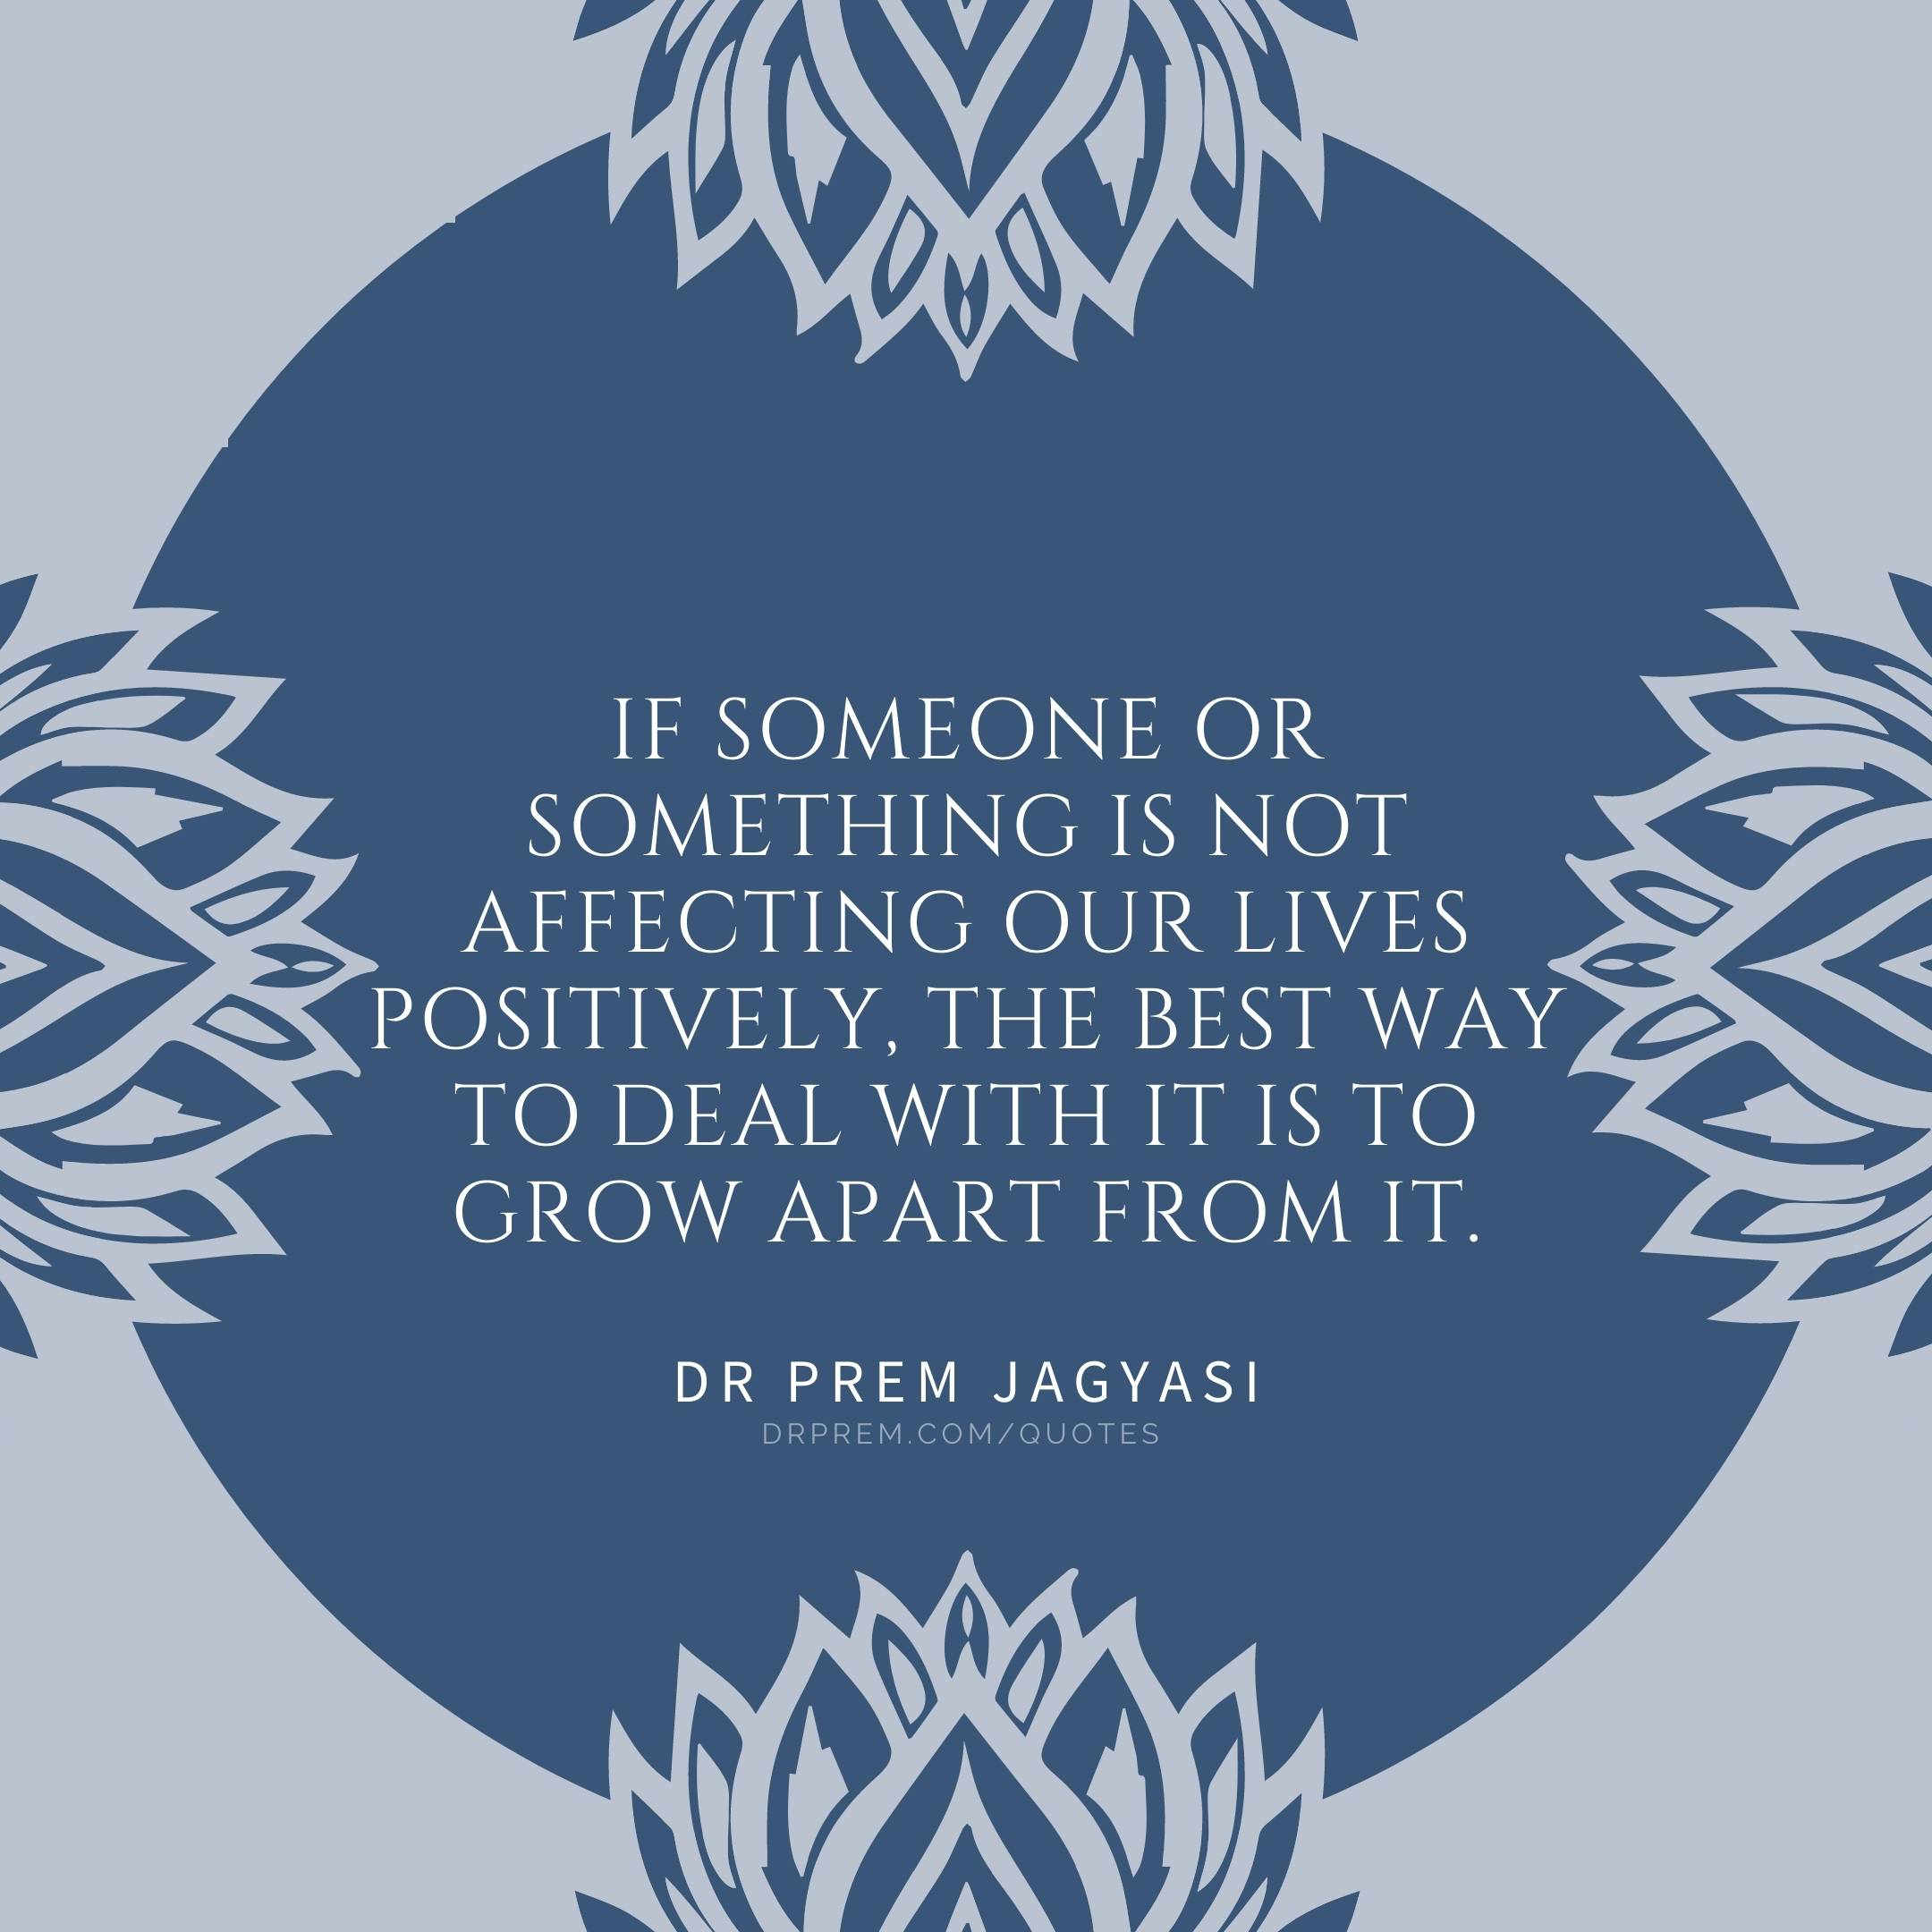 If Somone or something is not affecting our lives- Dr Prem Jagyasi Quotes